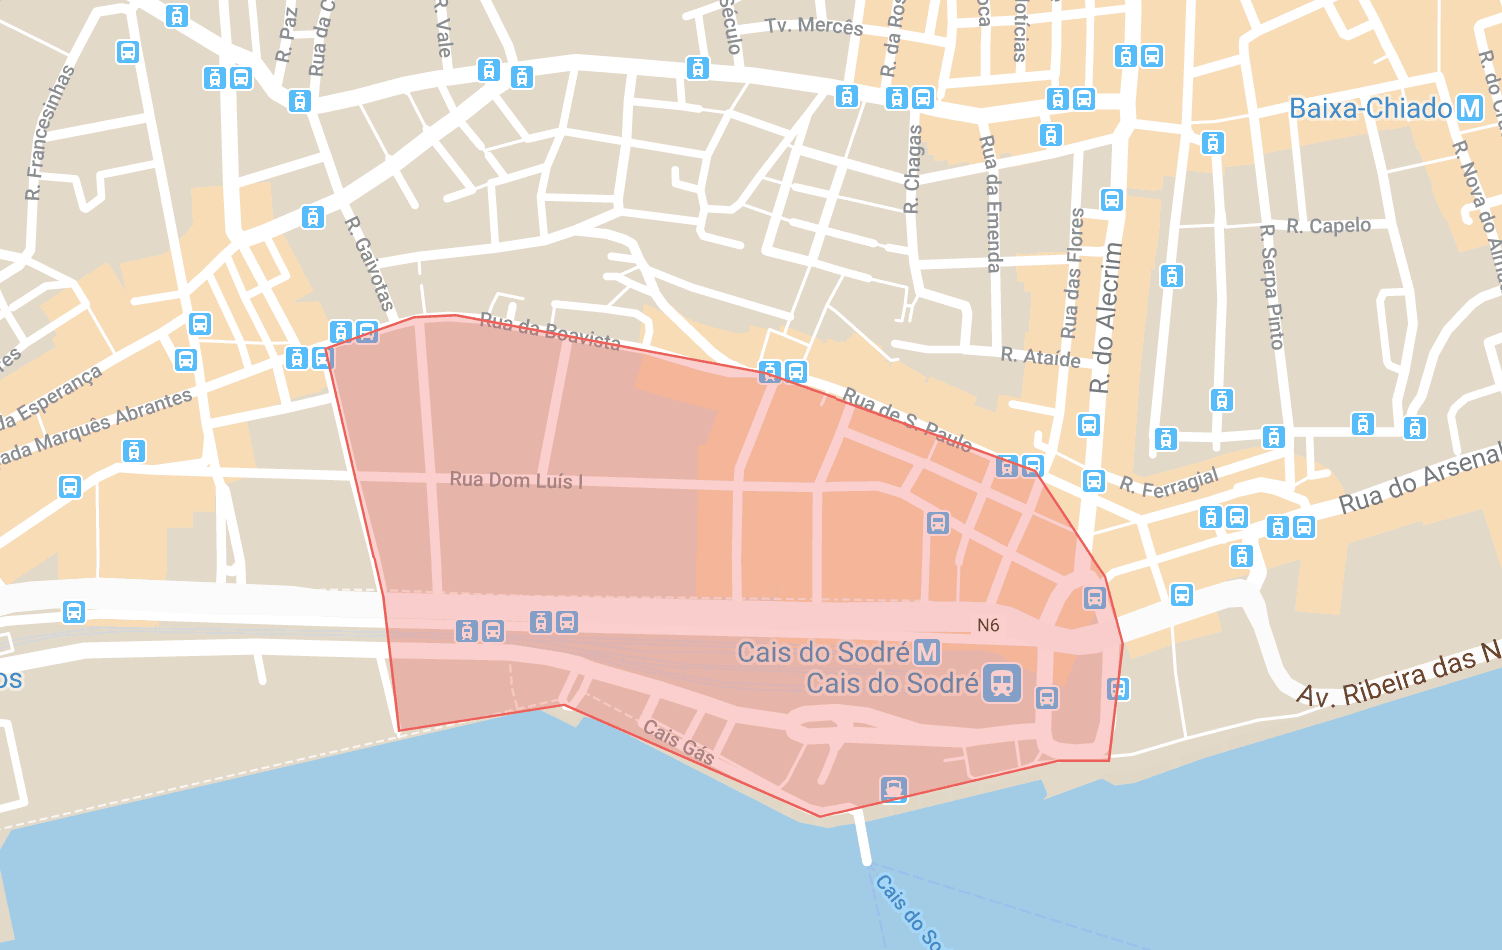 Accommodation in Lisbon map of the Cais do Sodre district